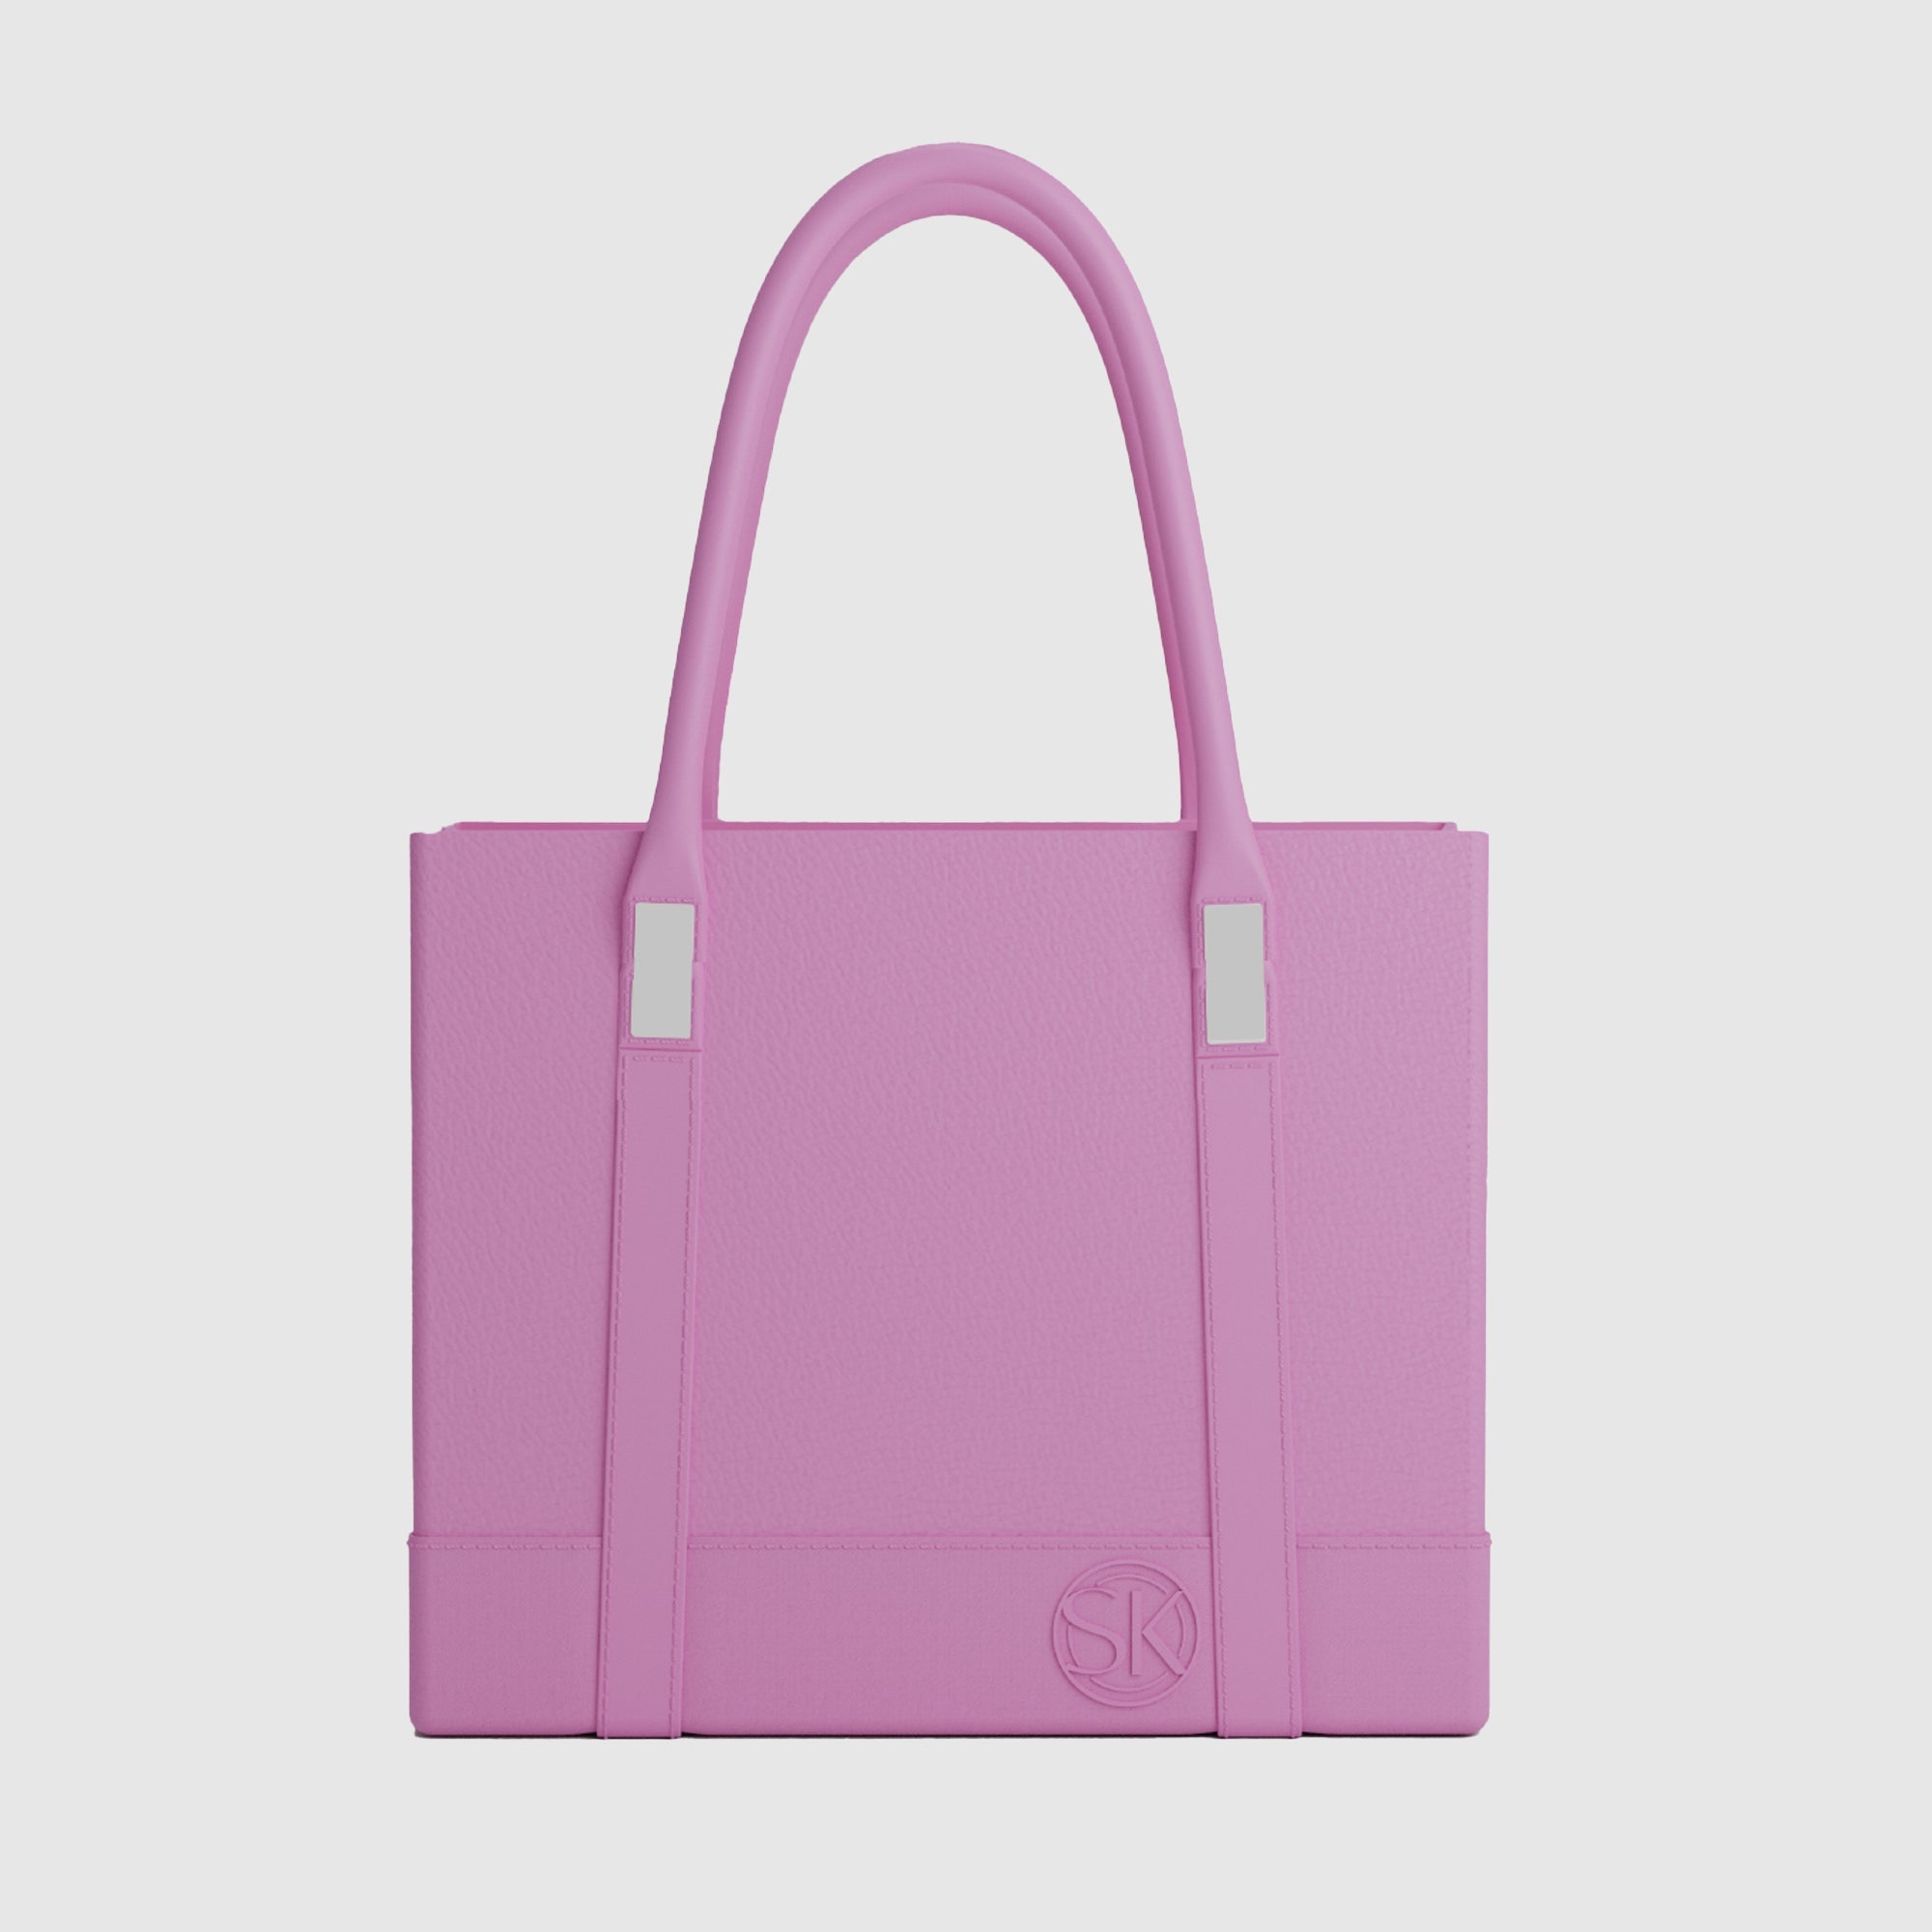 Color of the season, the Cali Tote in digital lavender tone is captivating, evoking a sense of tranquility and sophistication. Crafted with meticulous attention to detail and durable materials, this tote seamlessly blends style and functionality, making it the perfect accessory for any occasion